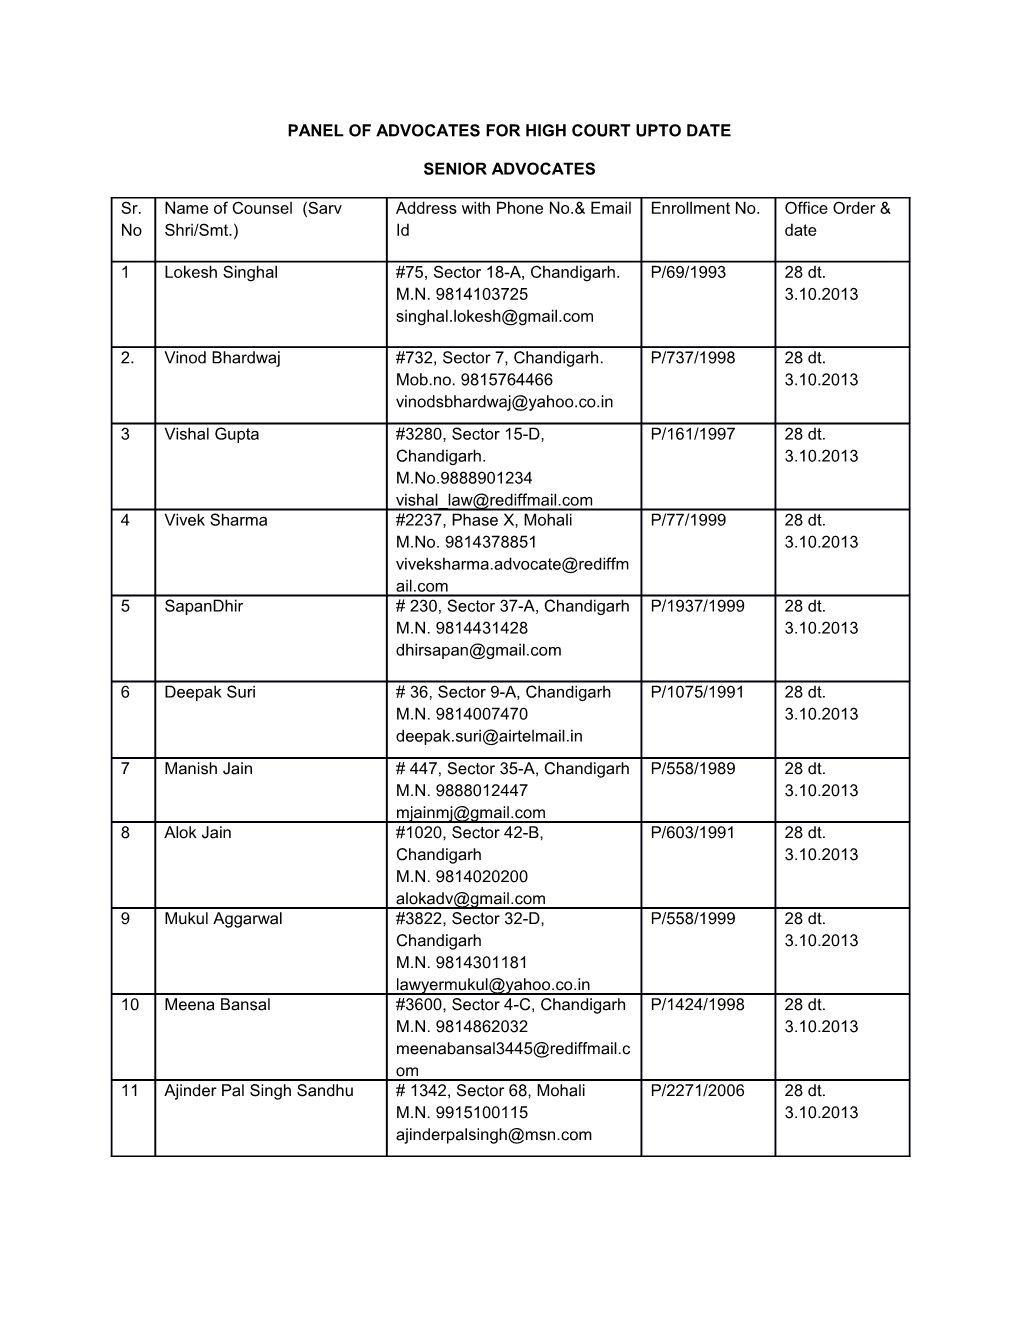 Panel of Advocates for High Court Upto Date